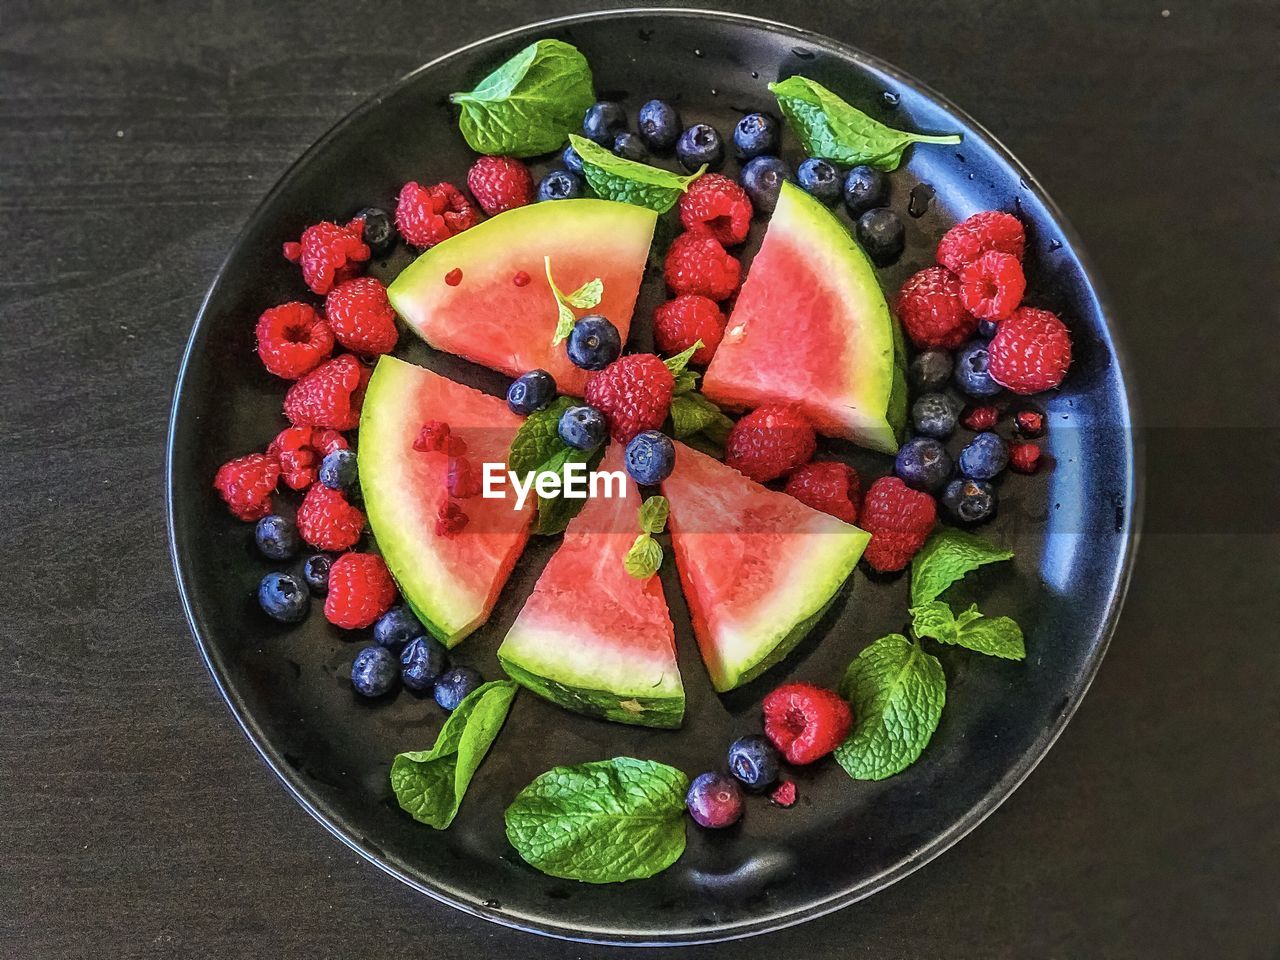 HIGH ANGLE VIEW OF FRESH FRUITS IN BOWL